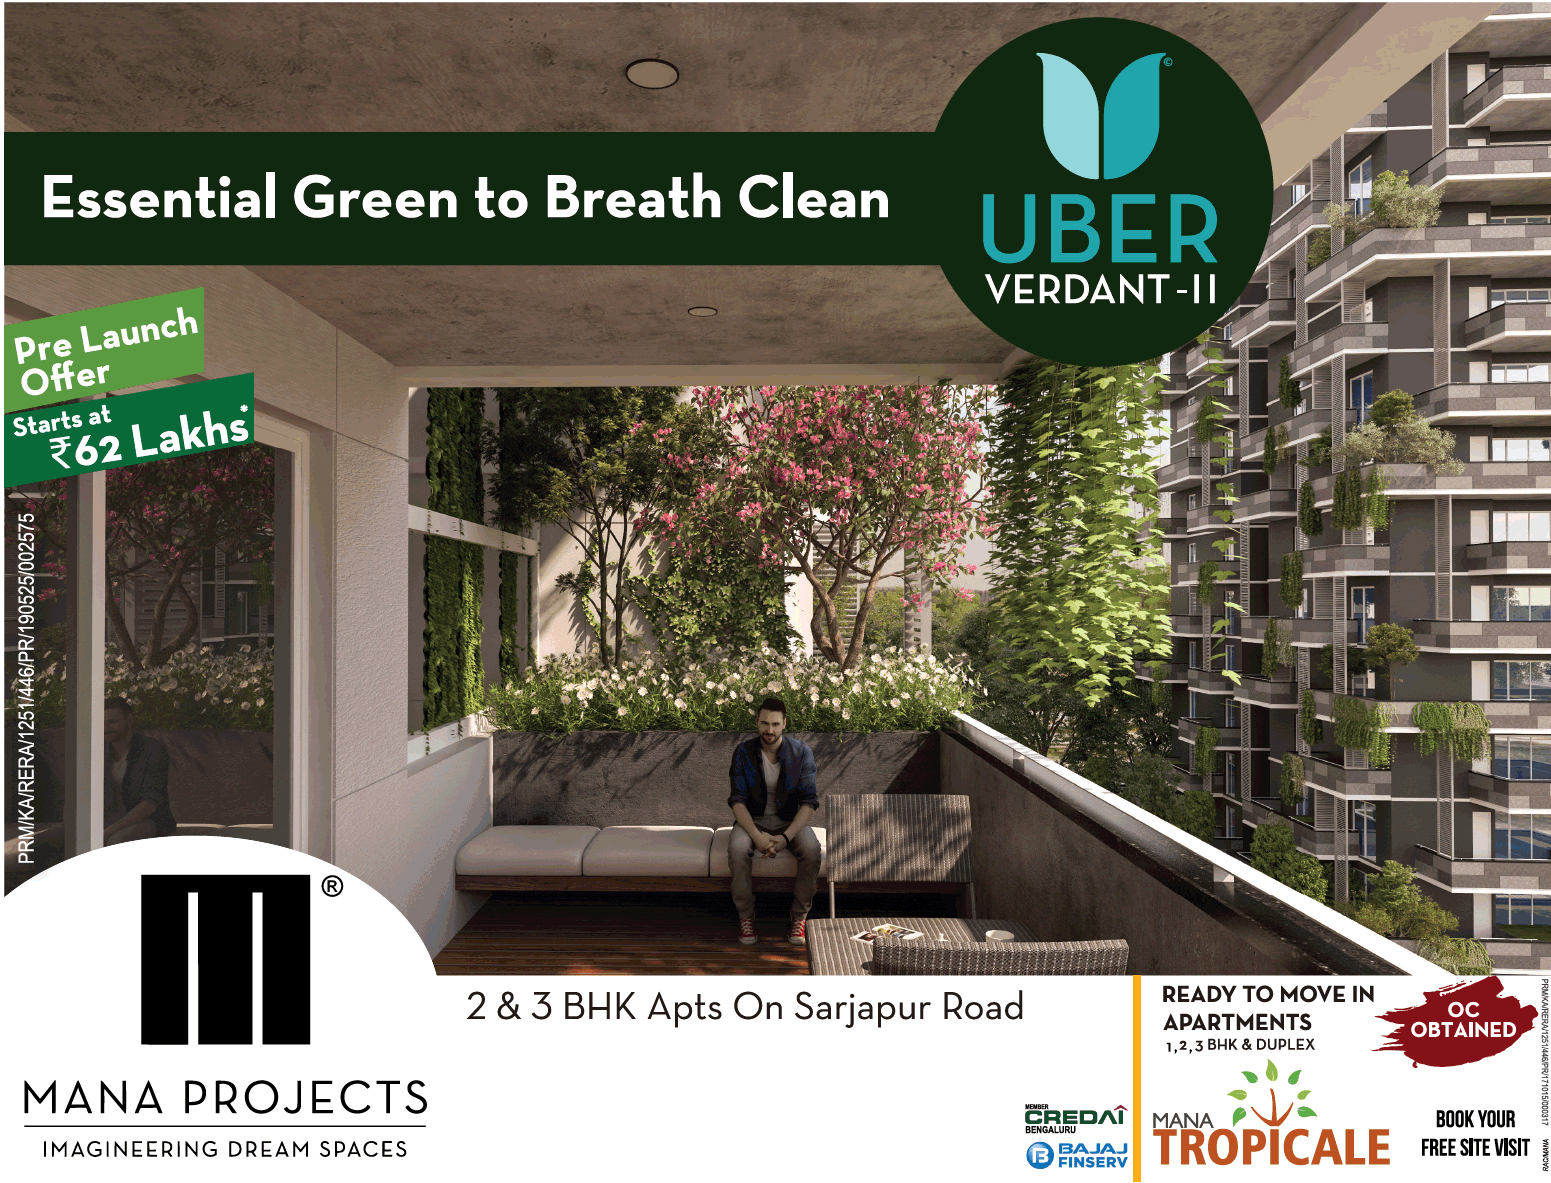 Mana Uber Verdant 2 Pre launch offer starting at Rs 62 Lakhs in Bangalore Update